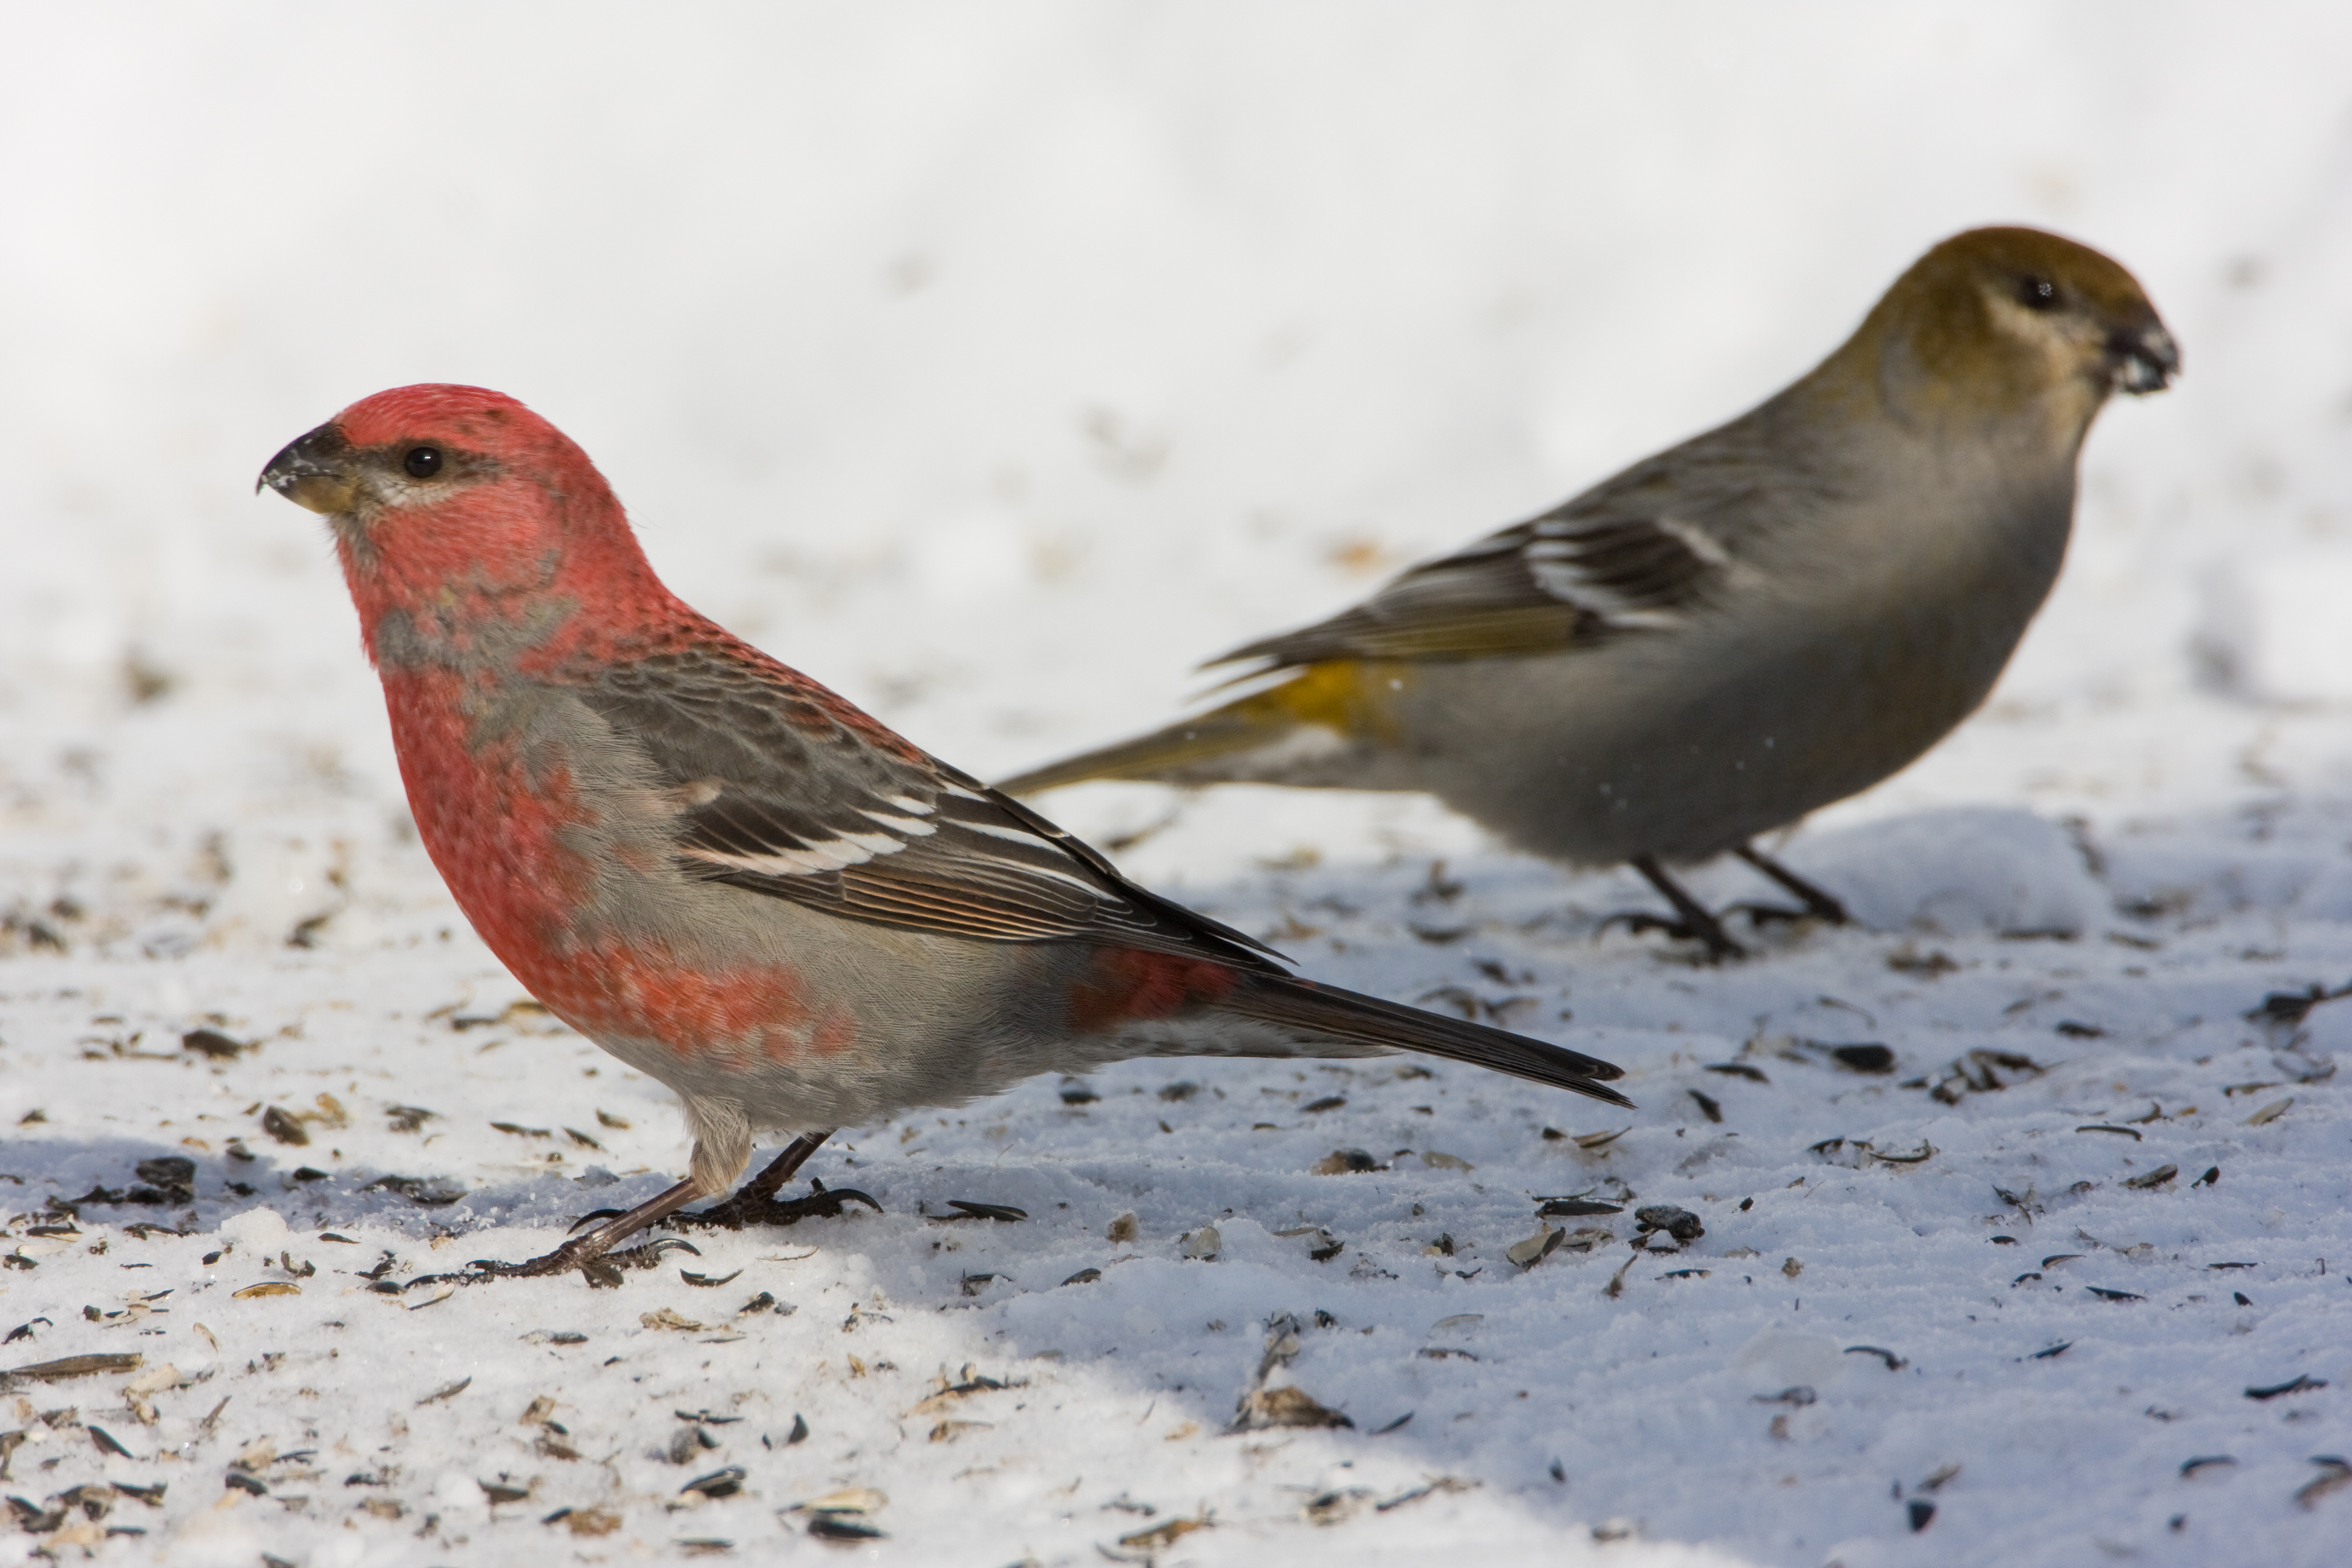 House finch, photo by Larry Master